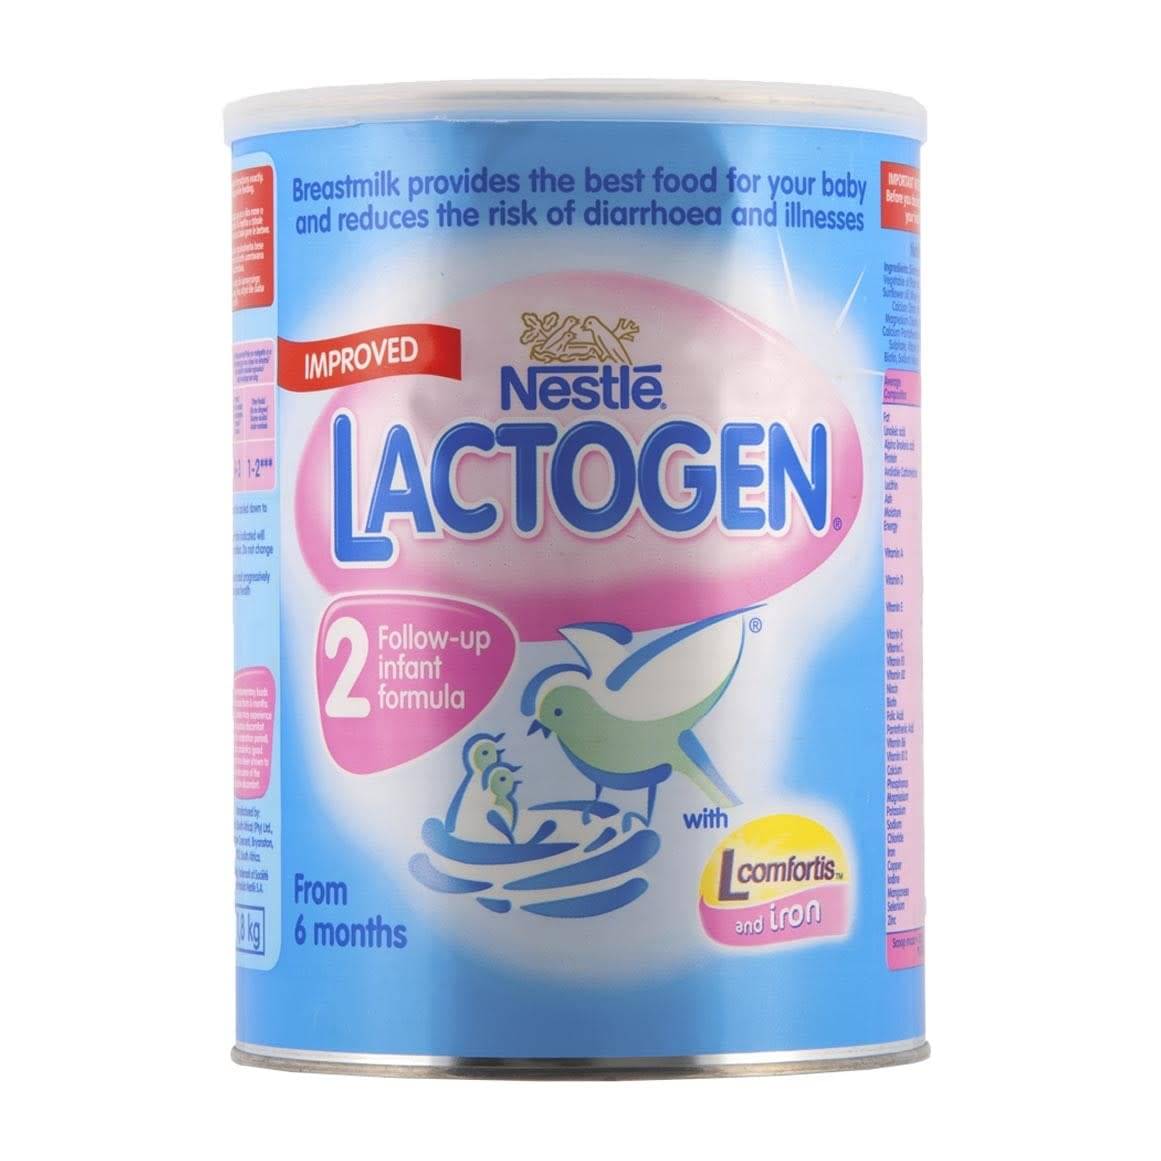 lactogen is good for baby